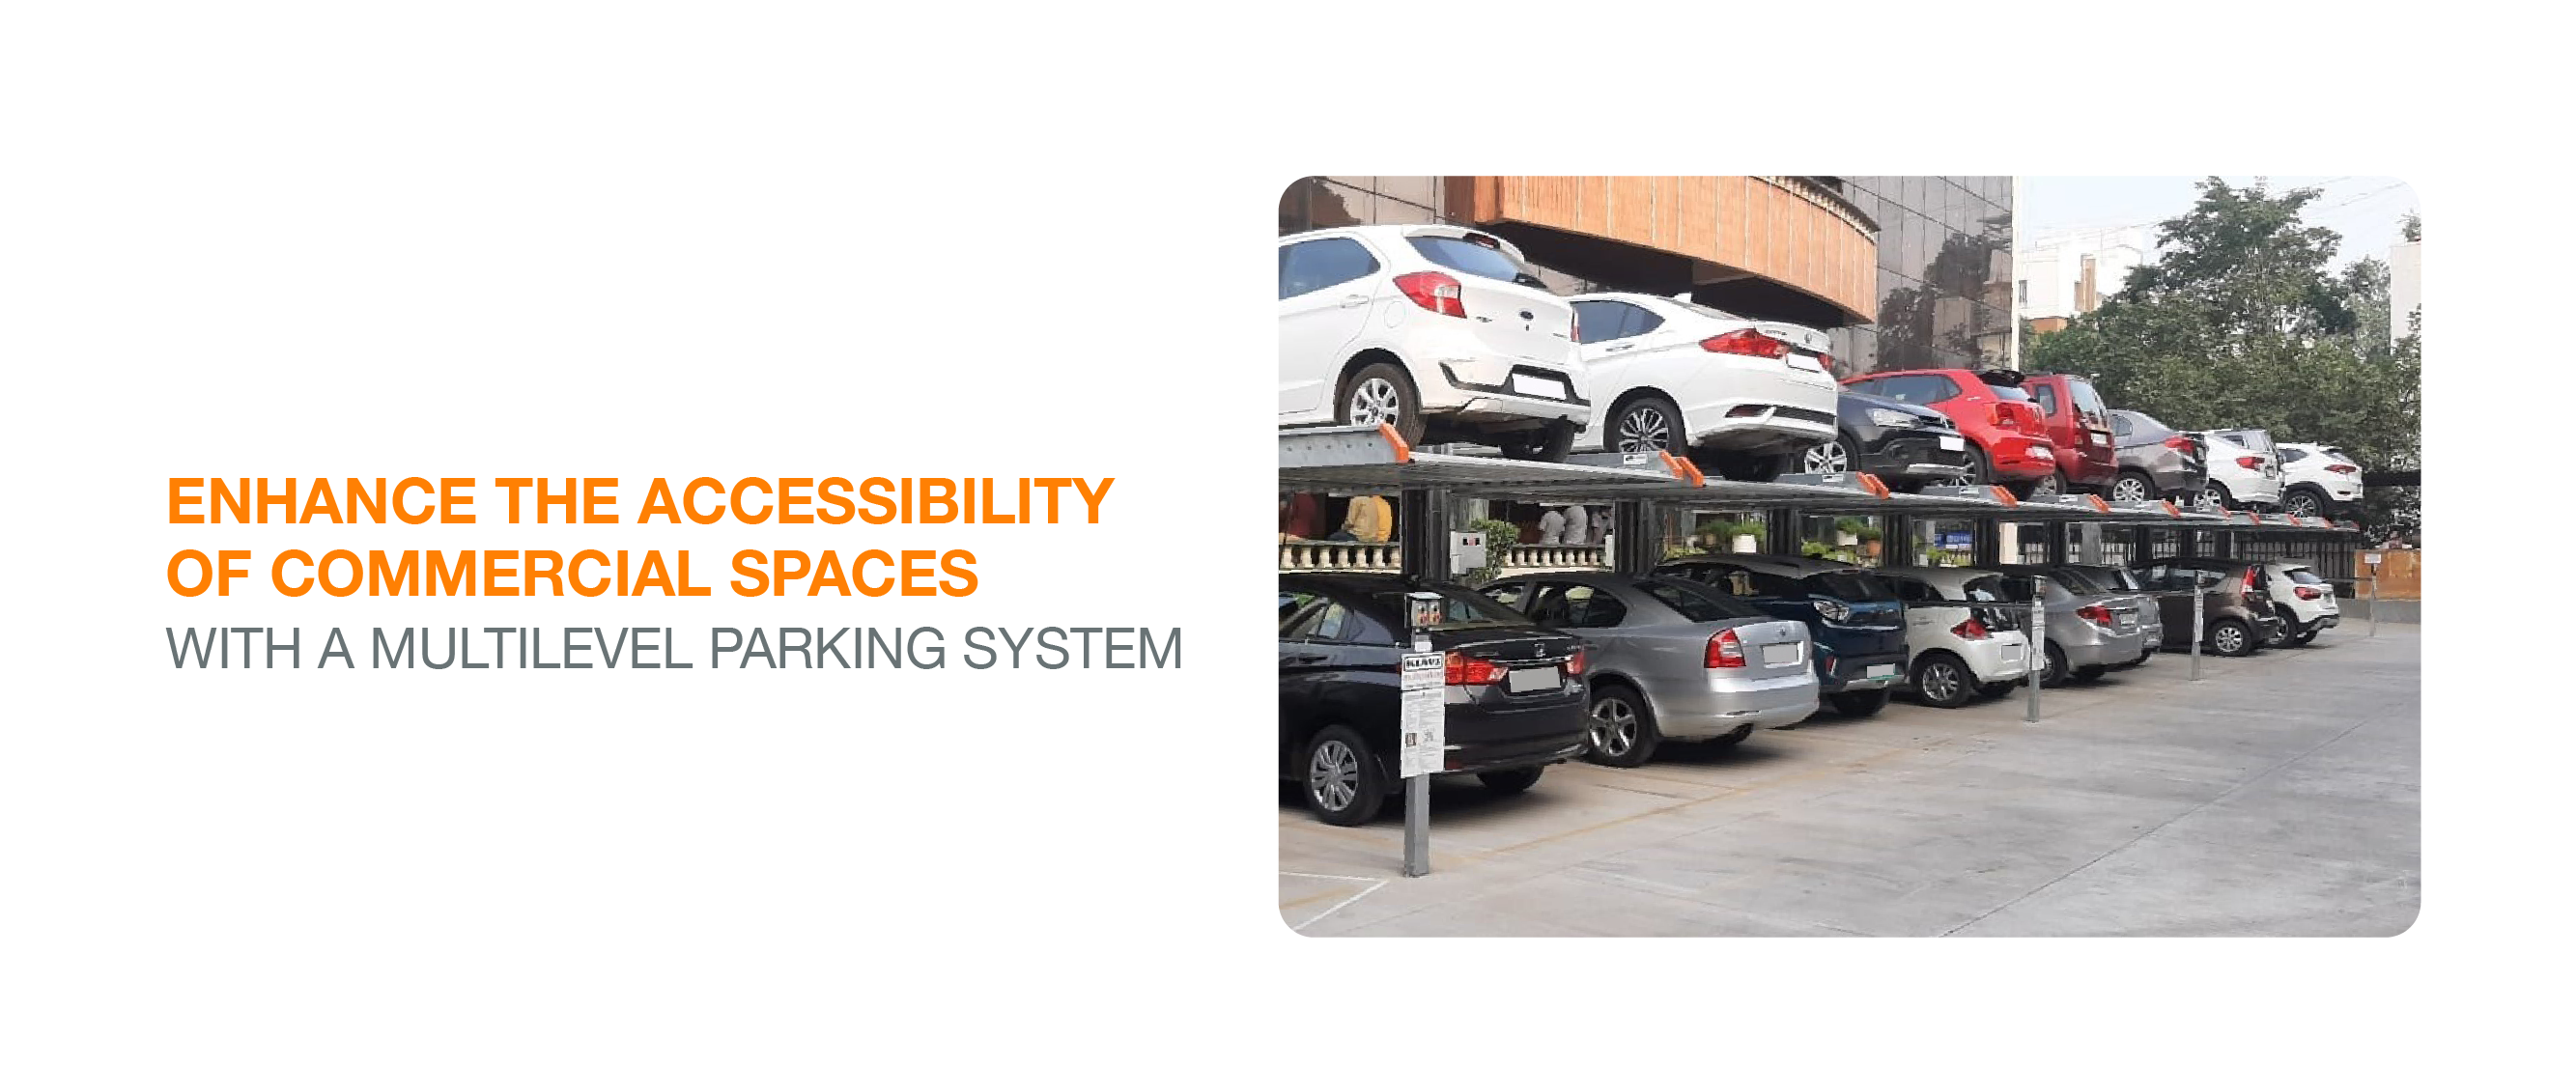 Enhance the accessibility of commercial spaces with a multilevel parking system.